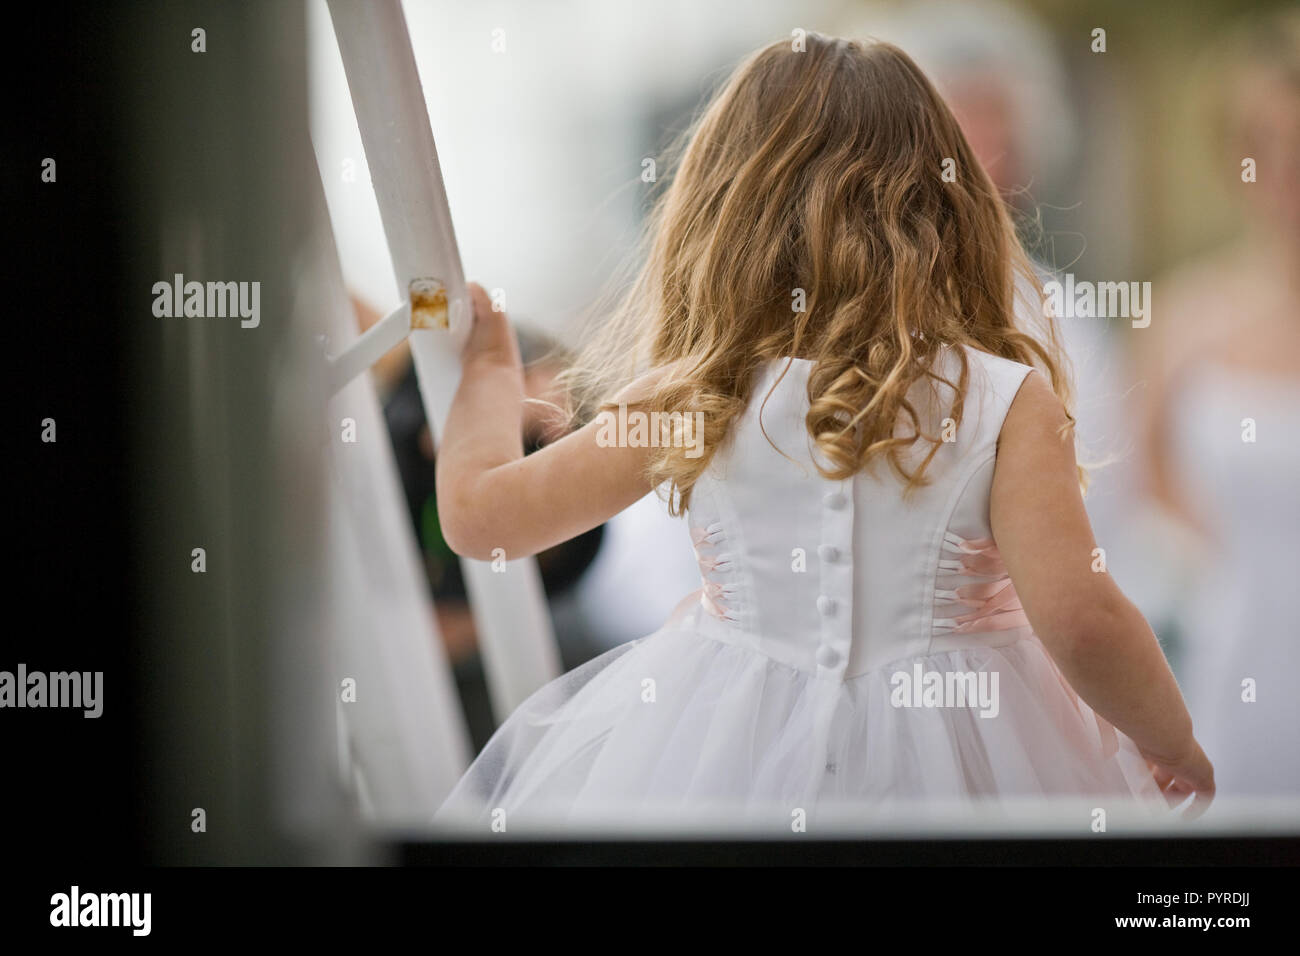 Young girl with long hair dressed as a flowergirl. Stock Photo